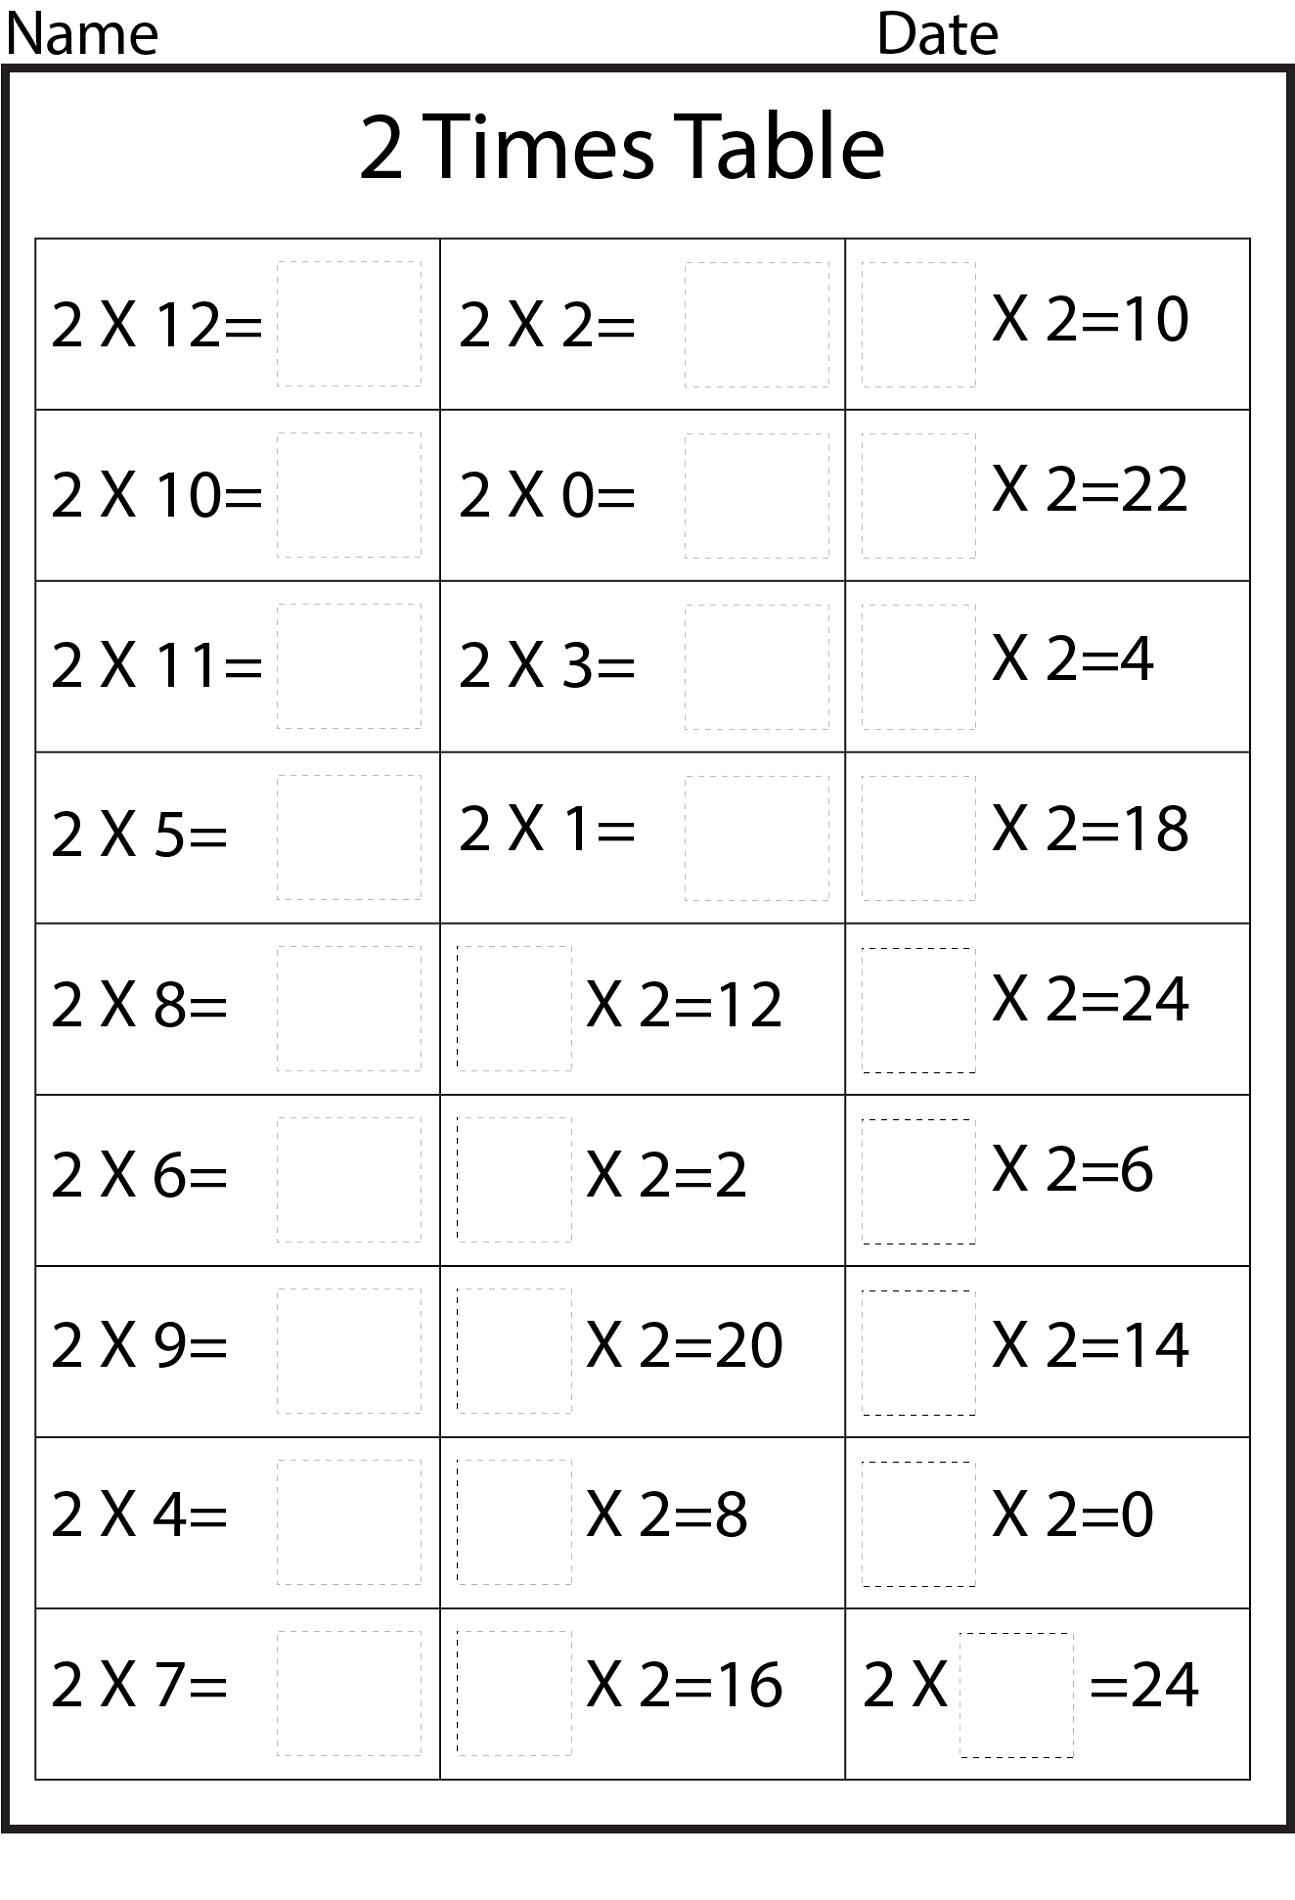 Printable 11 Times Table Worksheets  Activity Shelter With Regard To 2 Times Table Worksheet